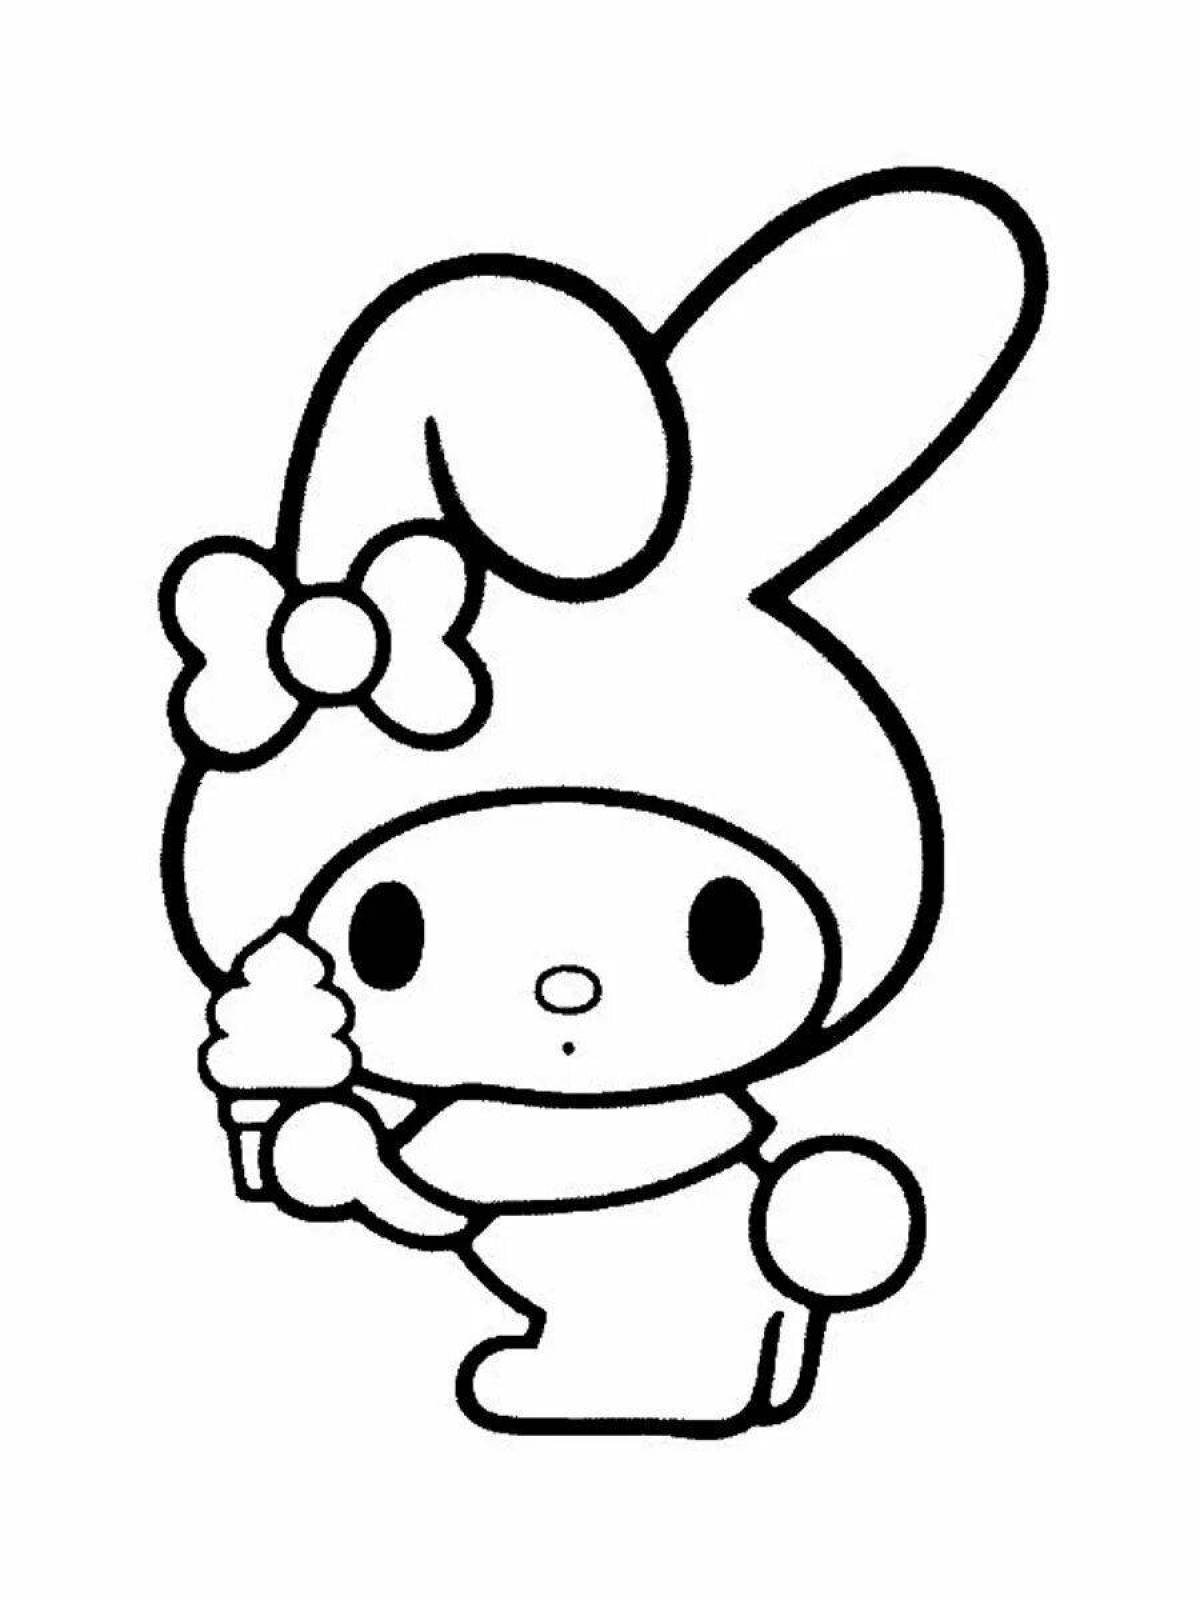 Milady's magical hello kitty coloring book